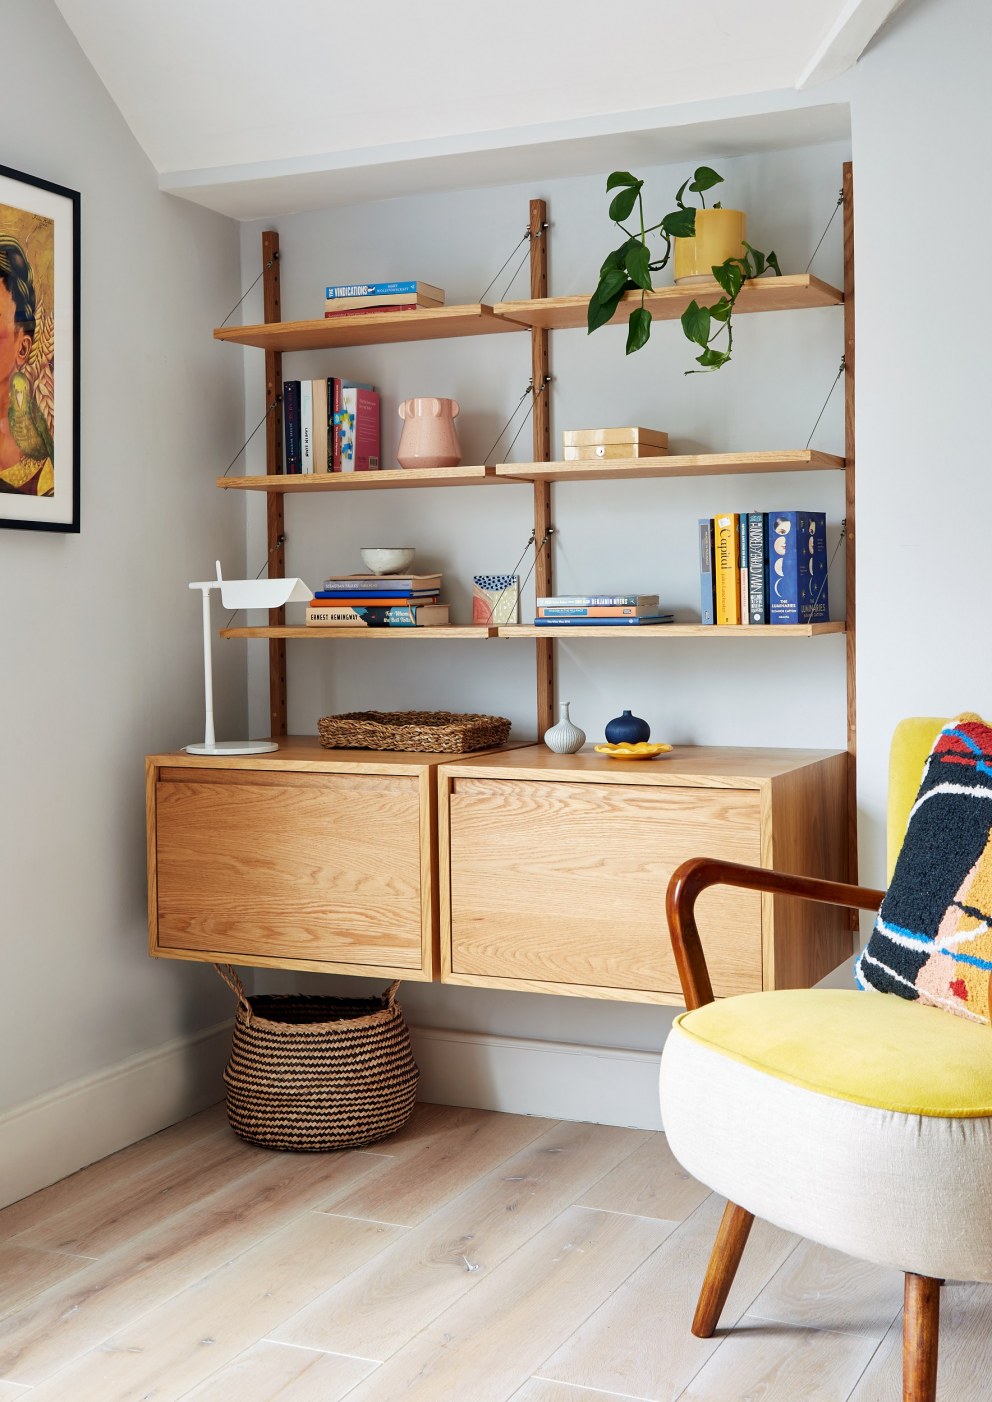 Tressillian Road | Bespoke shelving & bright yellow chair for client's home office | Interior Designers